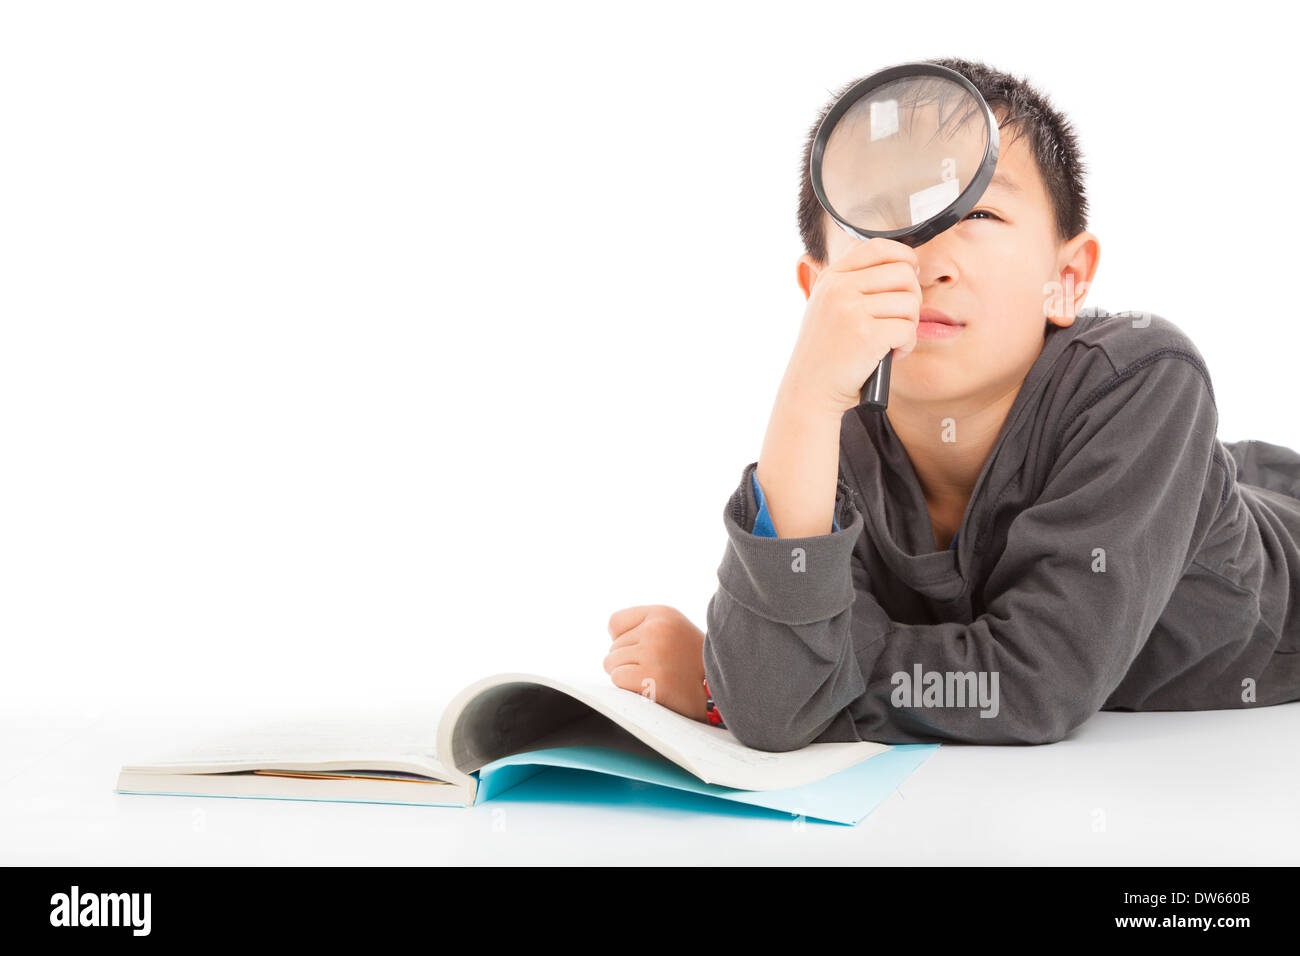 happy kid is holding magnifying glass to explore over white Stock Photo